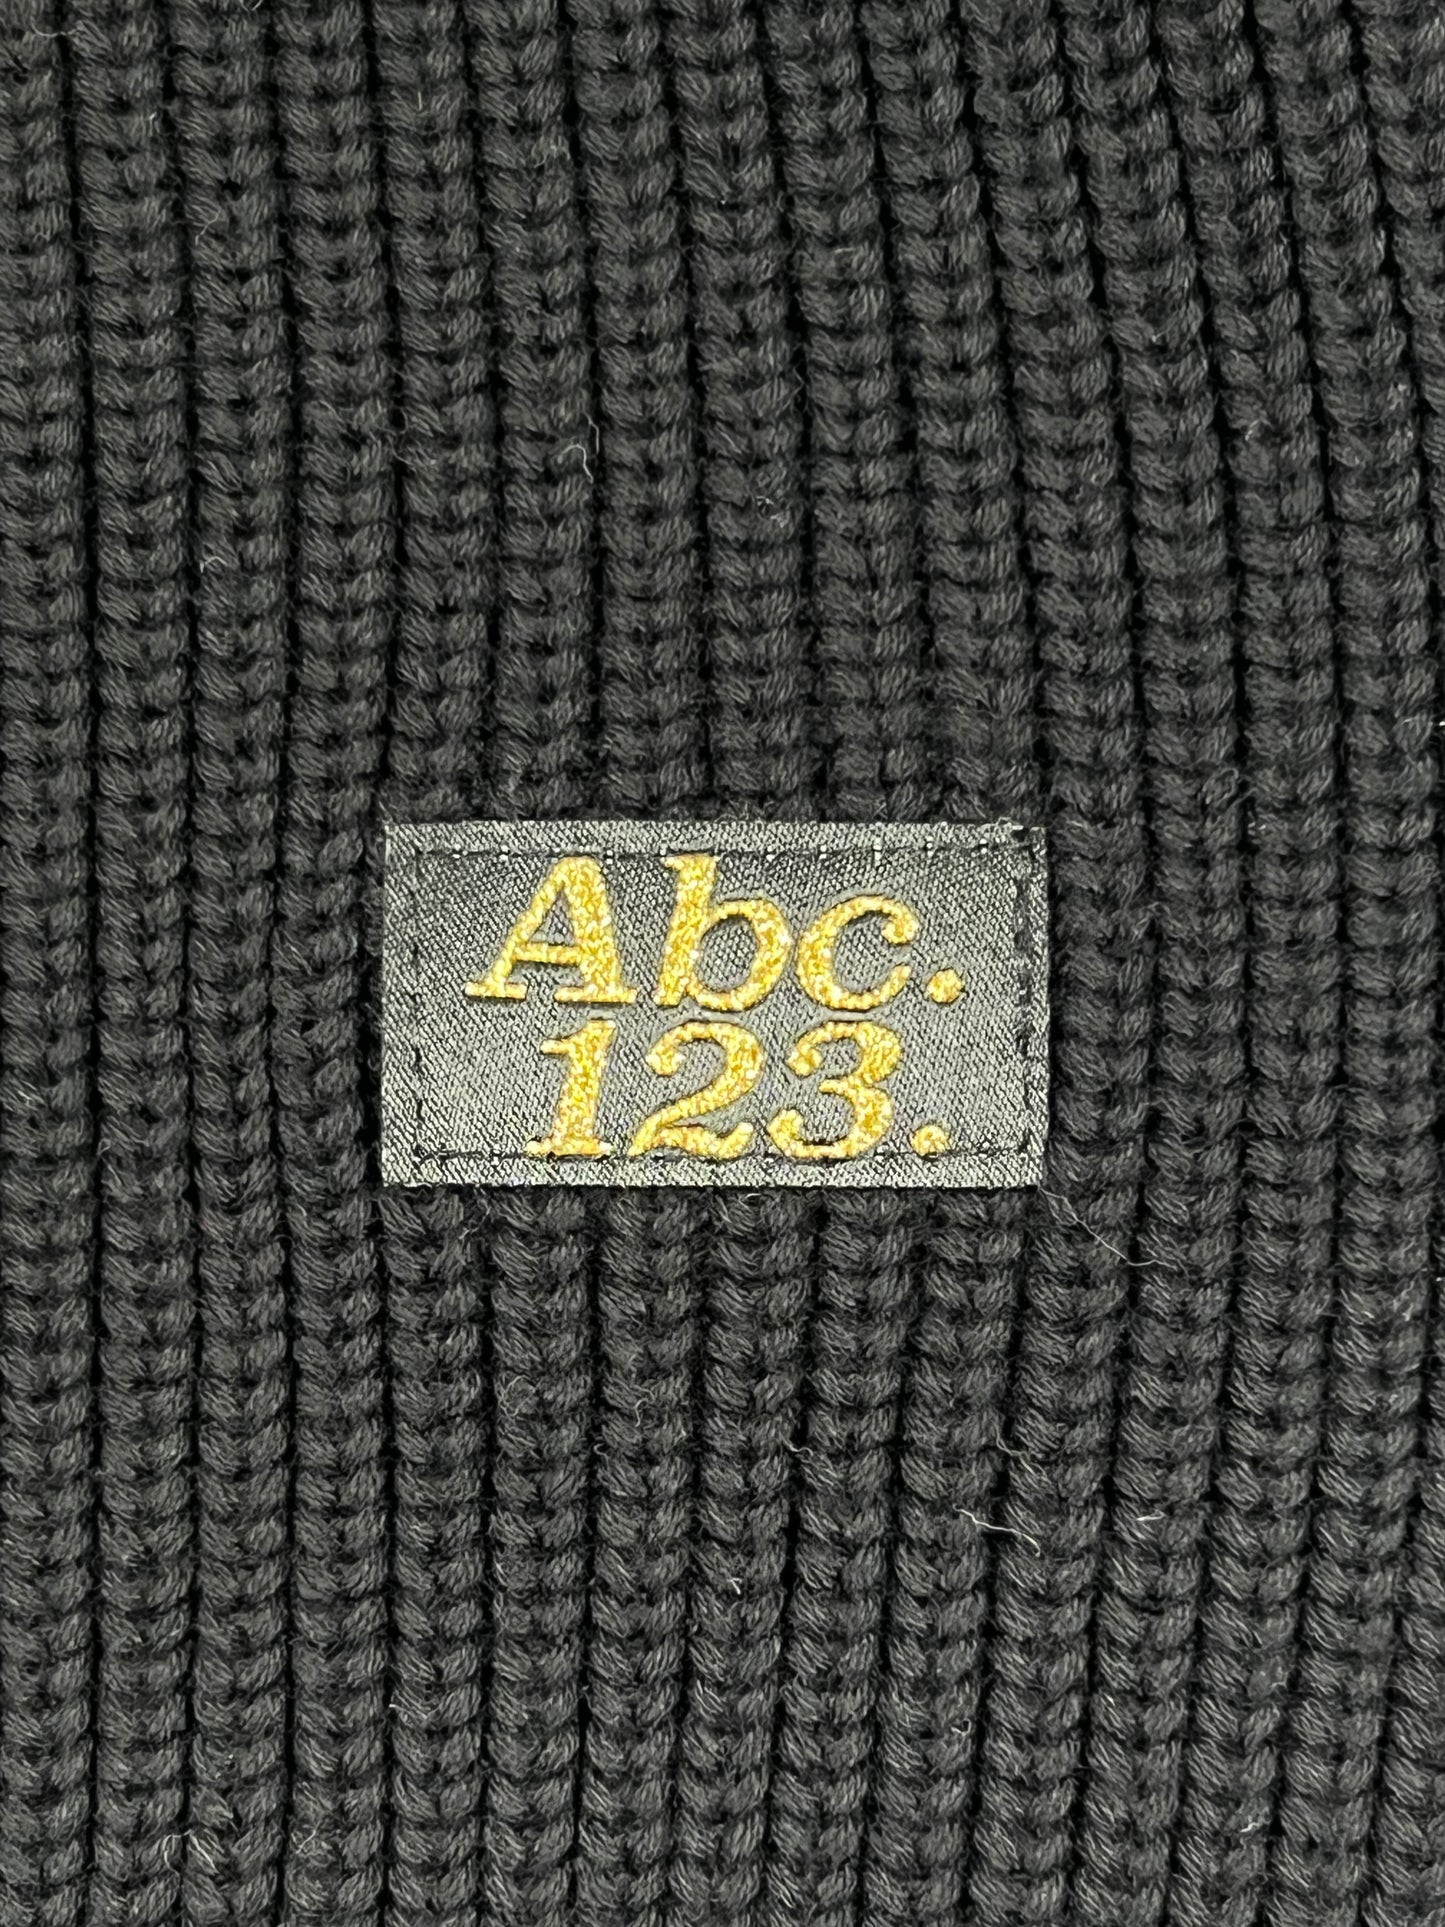 A ribbed crewneck in anthracite black with an embroidered logo reading "abc123" on it by ADVISORY BOARD CRYSTALS.